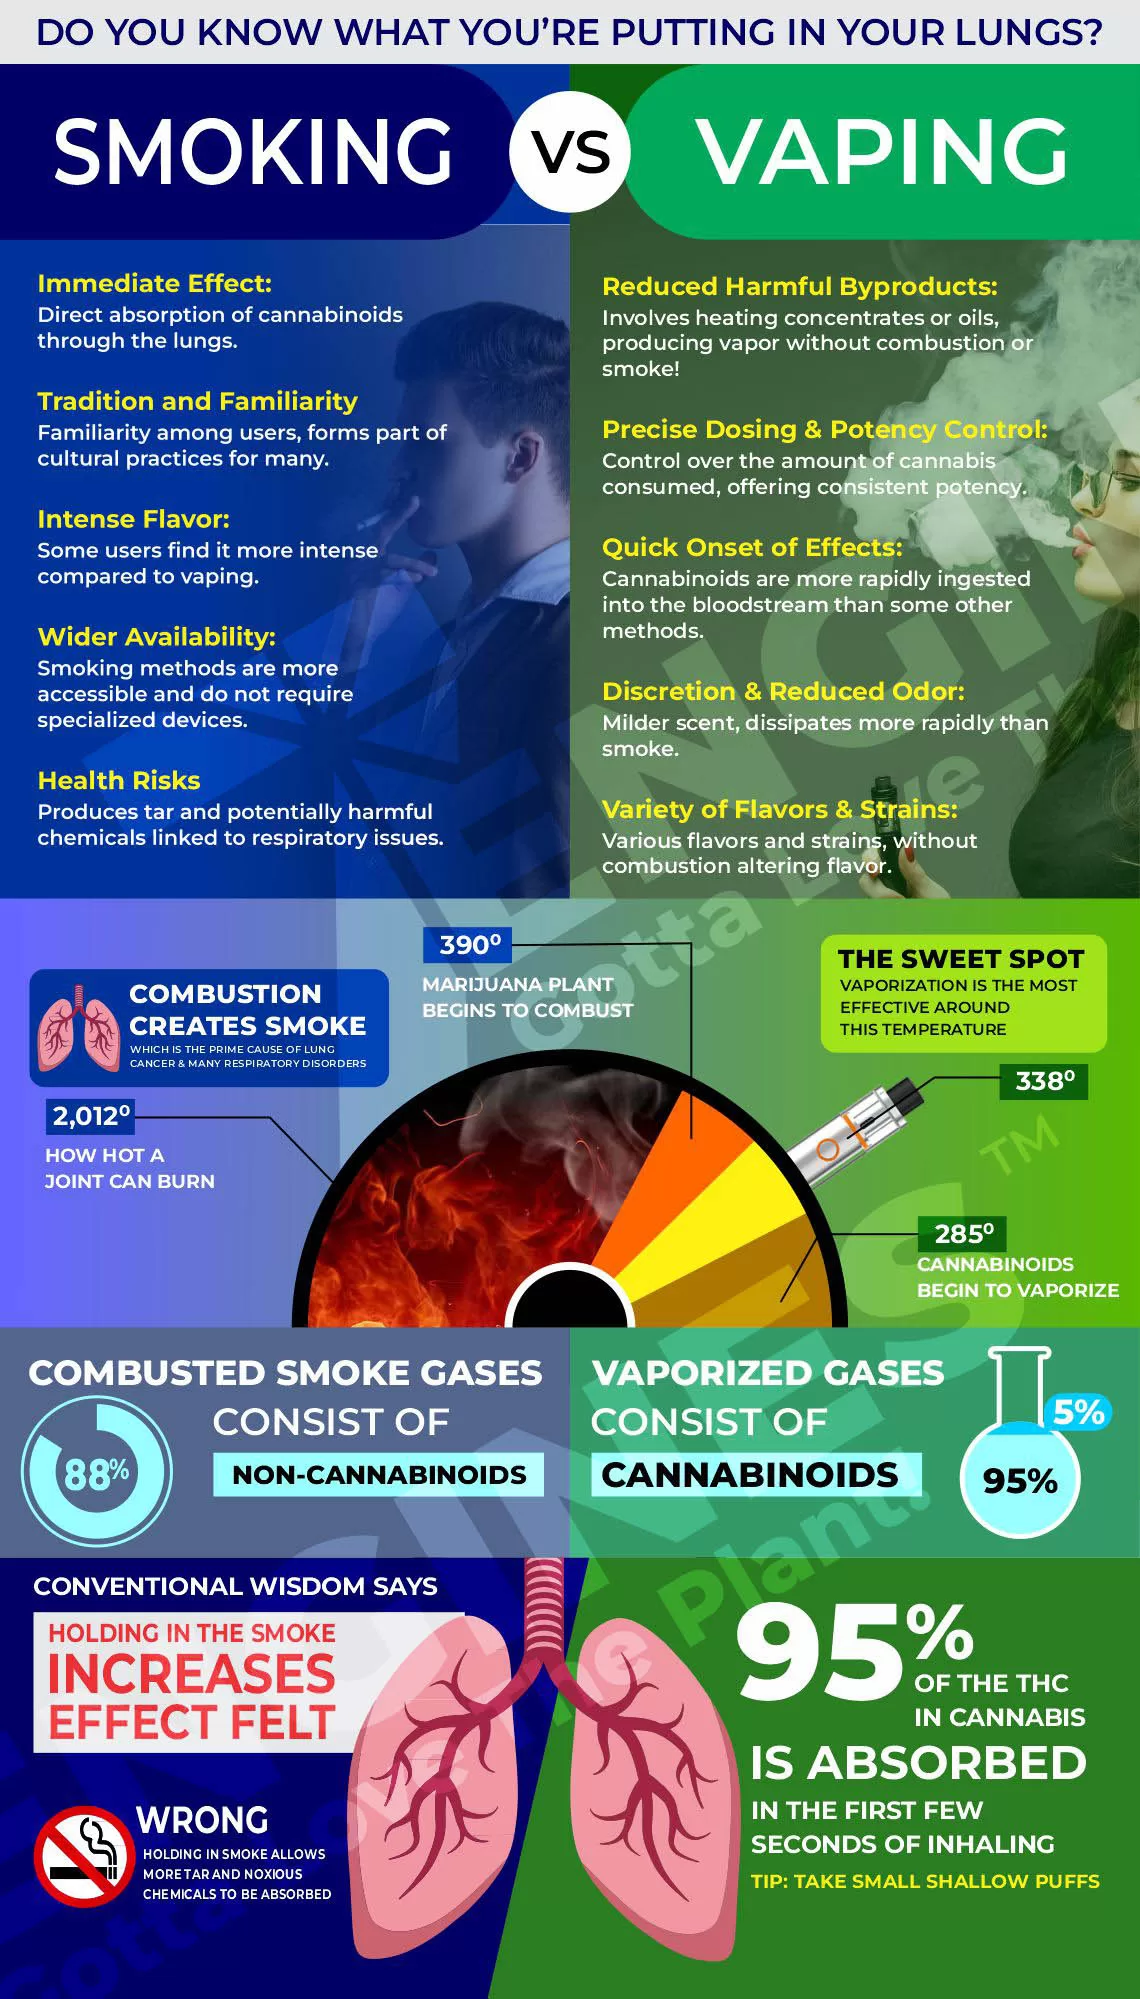 The pros and cons of vaping and smoking explained in a poster